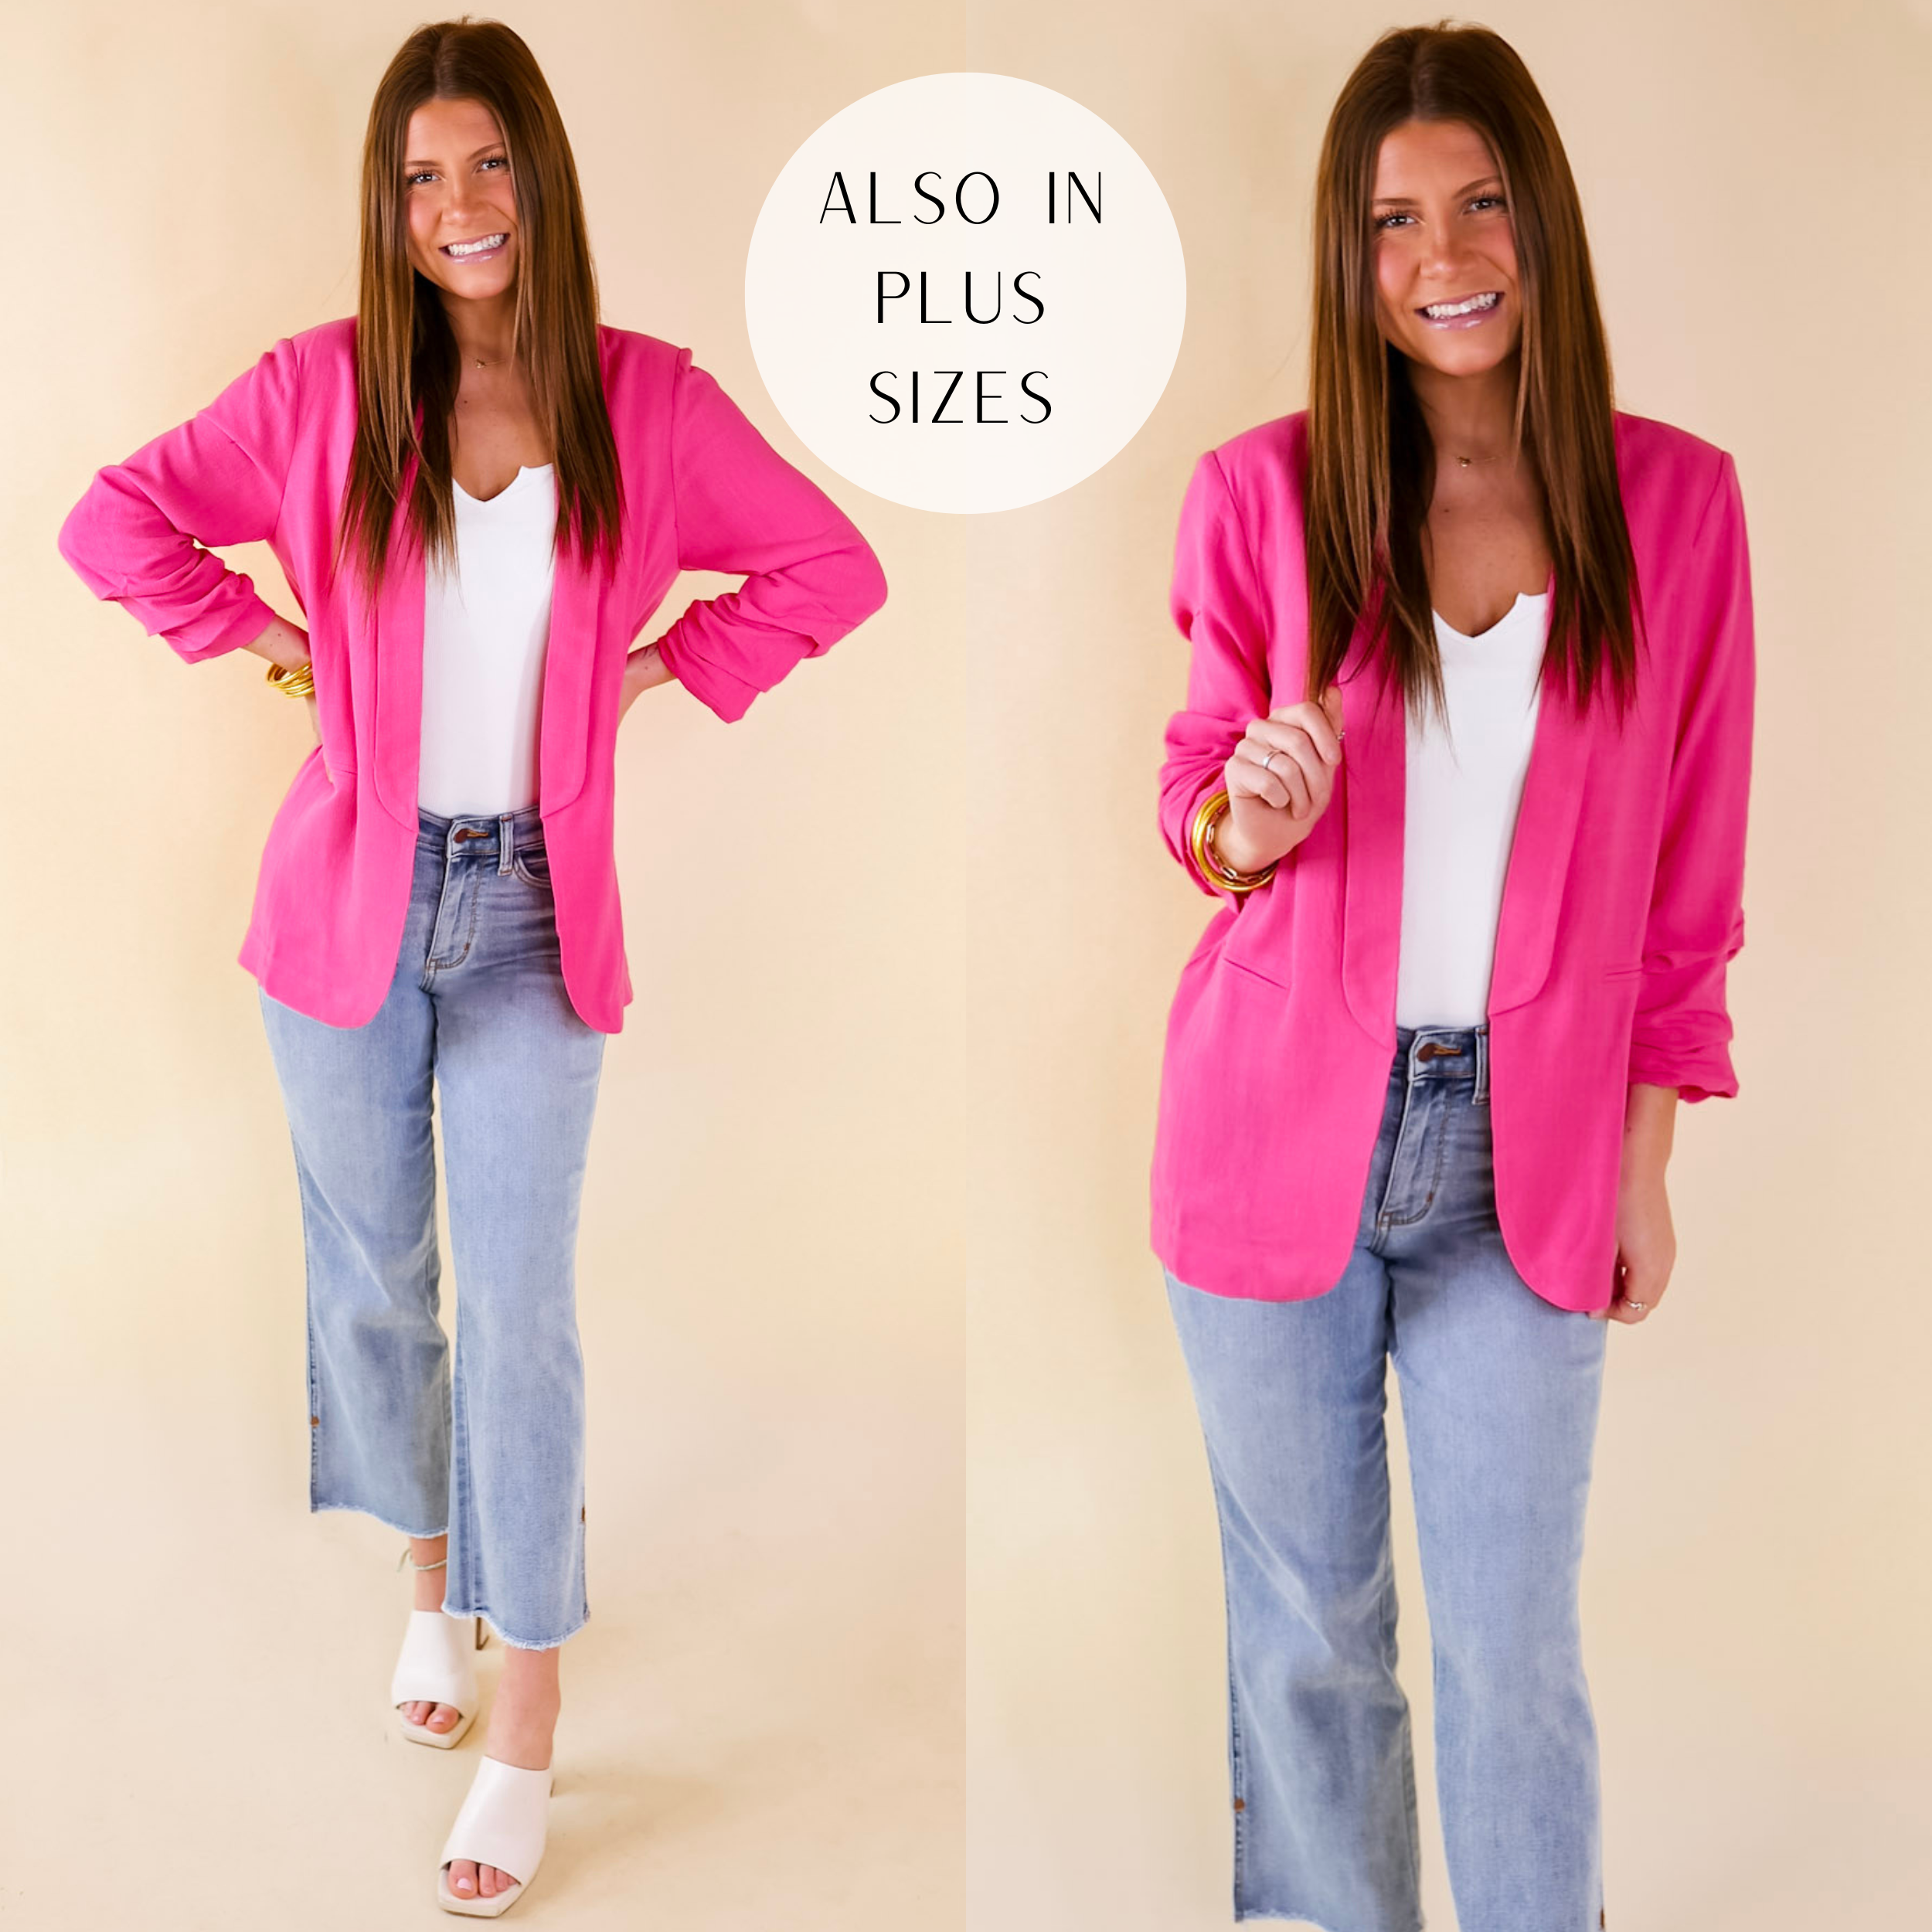 Model is wearing an open front linen blazer with a collared neckline and 3/4 sleeves. Model has this hot pink blazer on over a white tank top, light wash jeans, ivory heels, and gold jewelry.